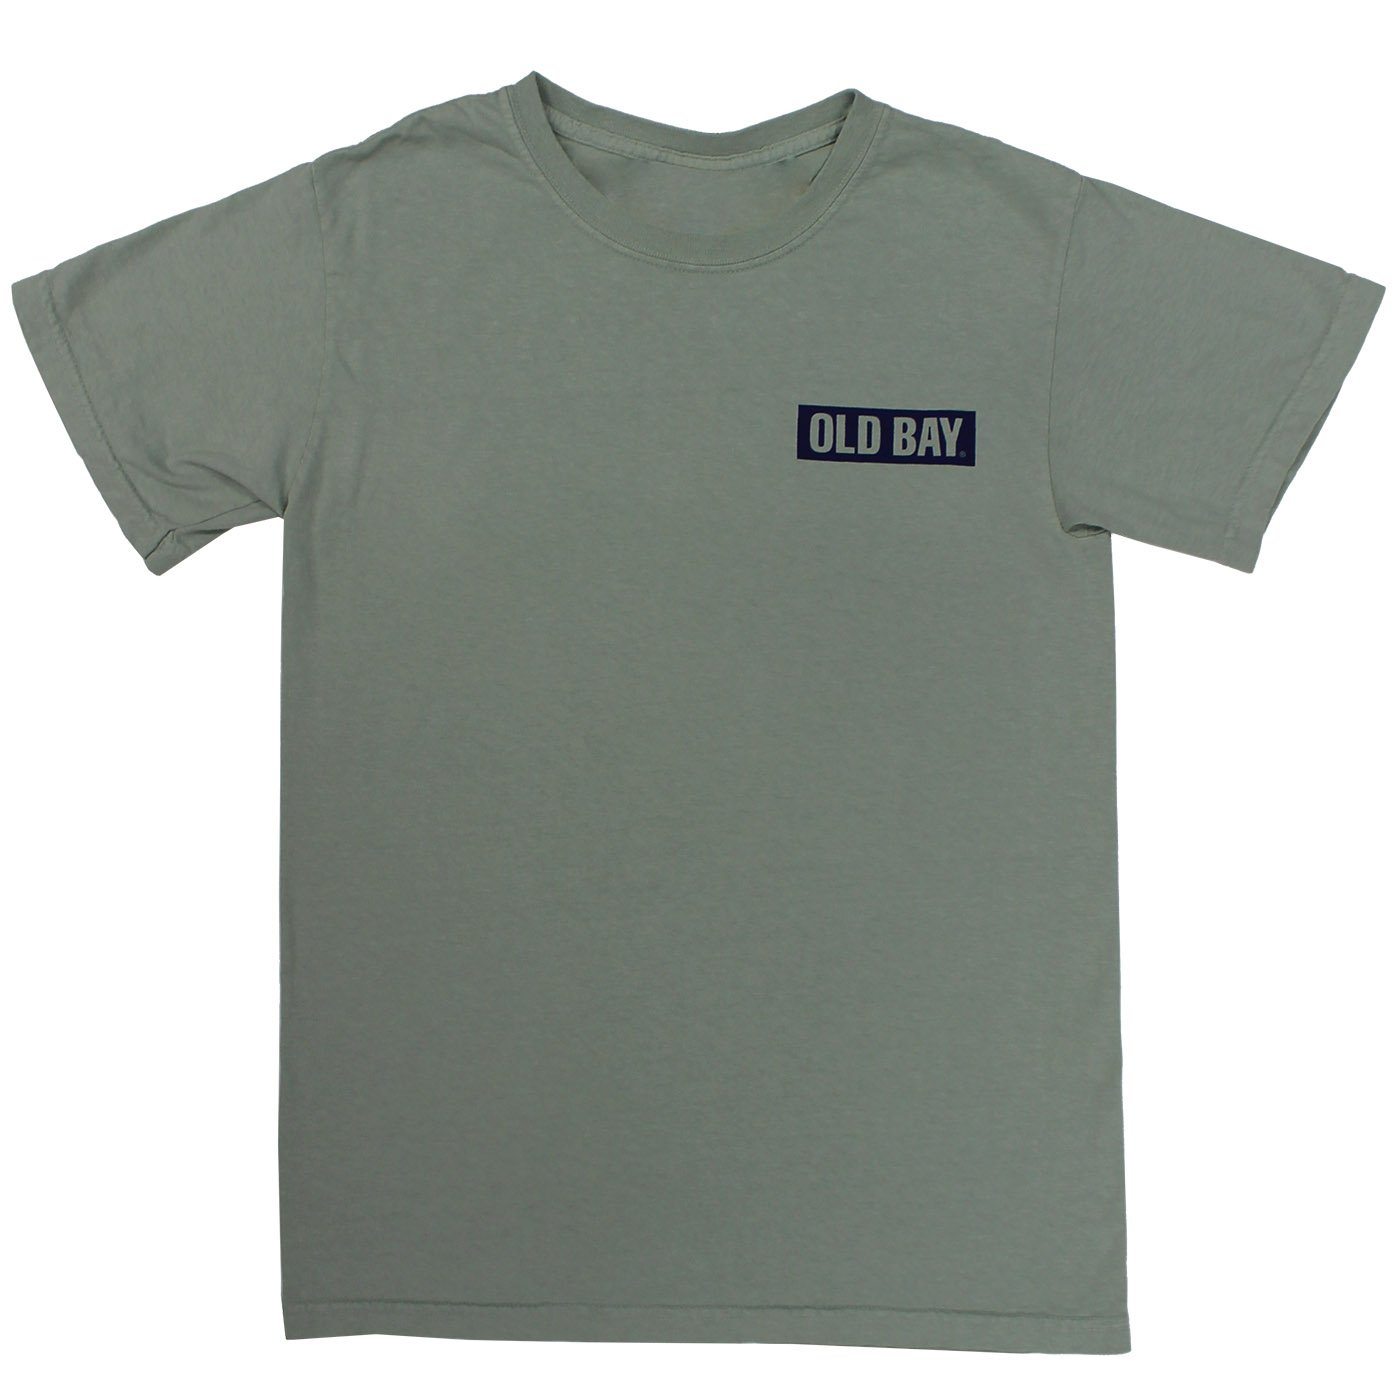 We're Going To Need A Bigger Weekend Old Bay Cooler (Bay Green) / Shirt - Route One Apparel